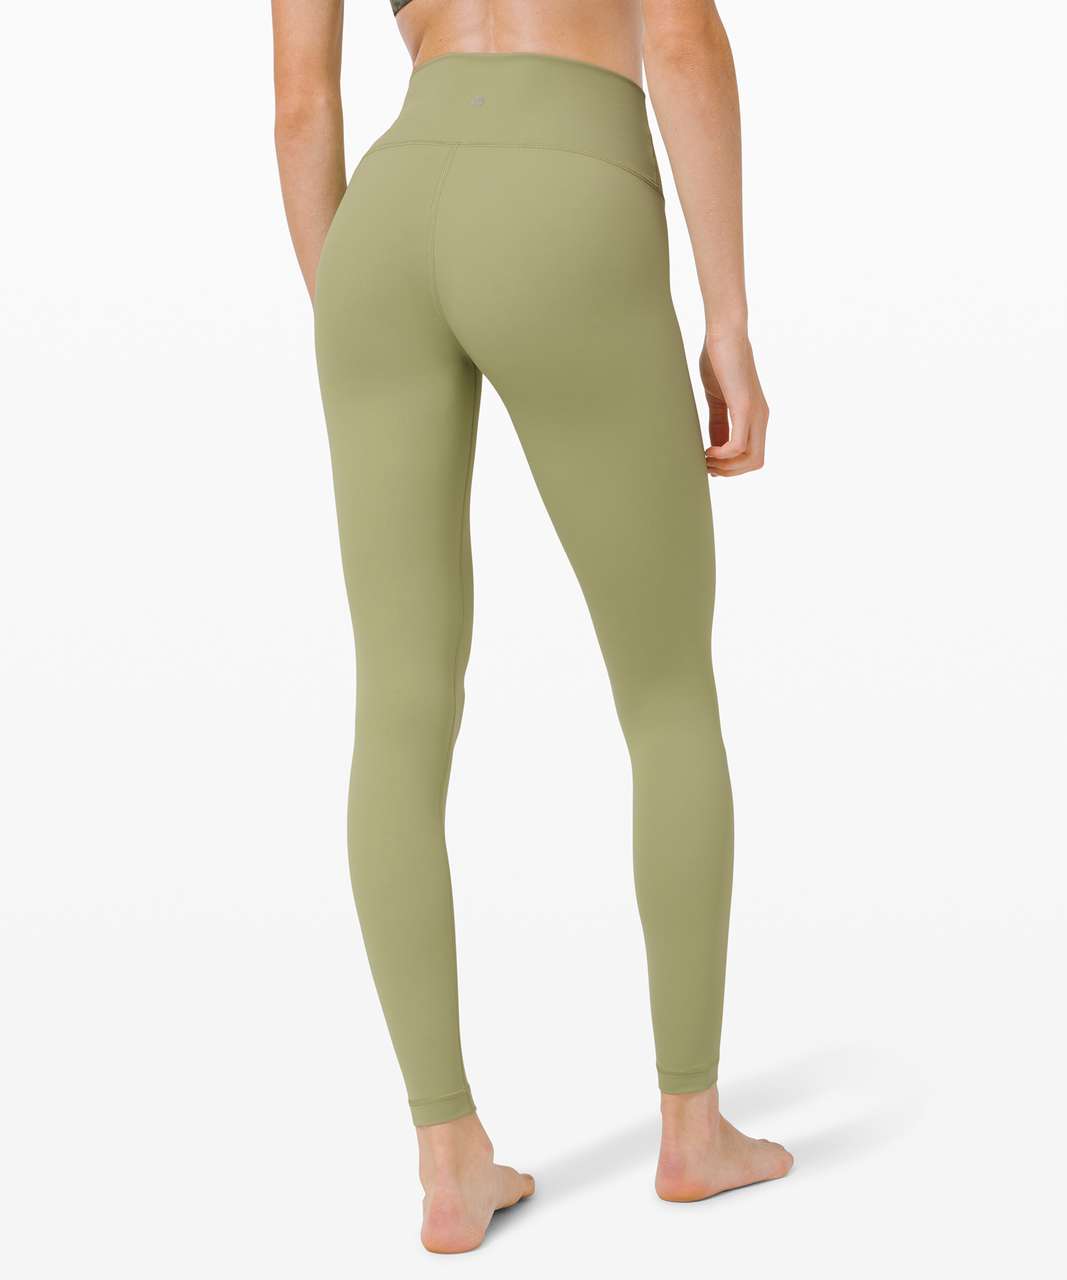 $98 vs $30 dupe for lululemon wunder under that are so good! These